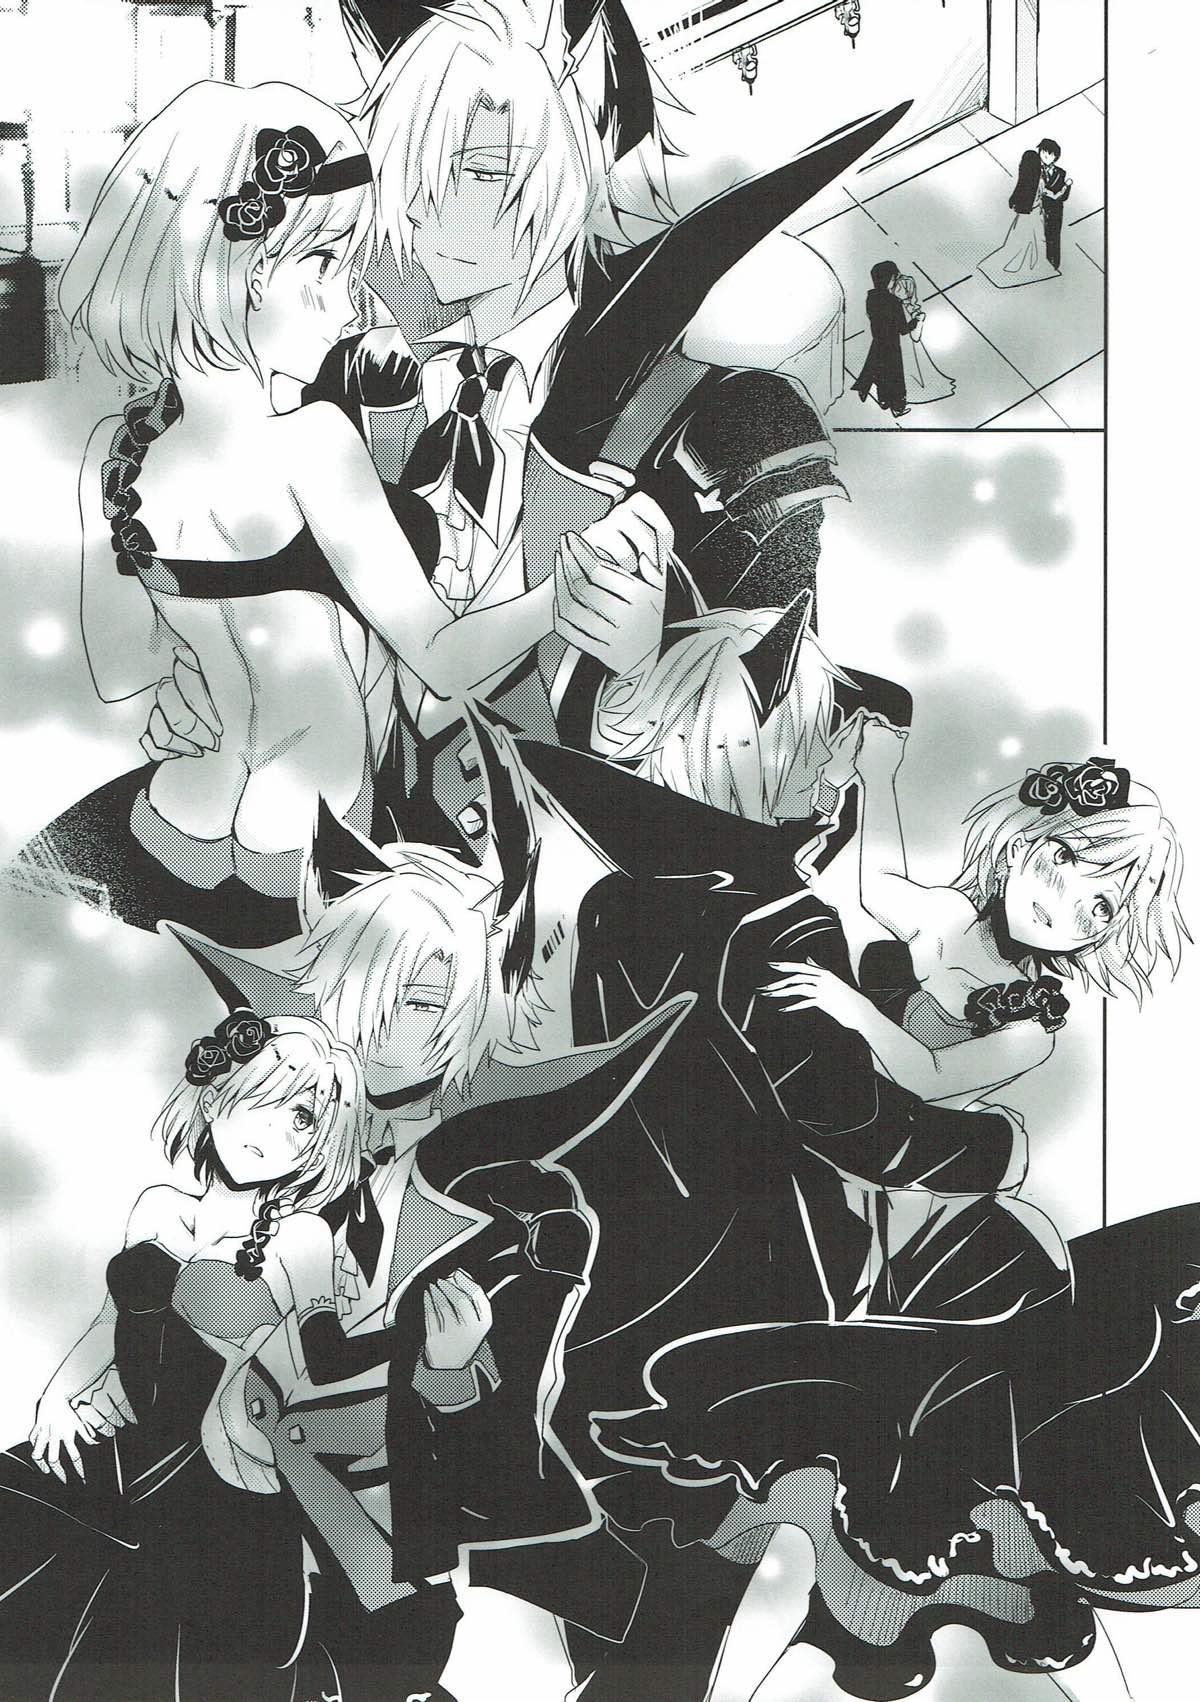 Ass Fuck Shall We Dance? - Granblue fantasy Scandal - Page 9